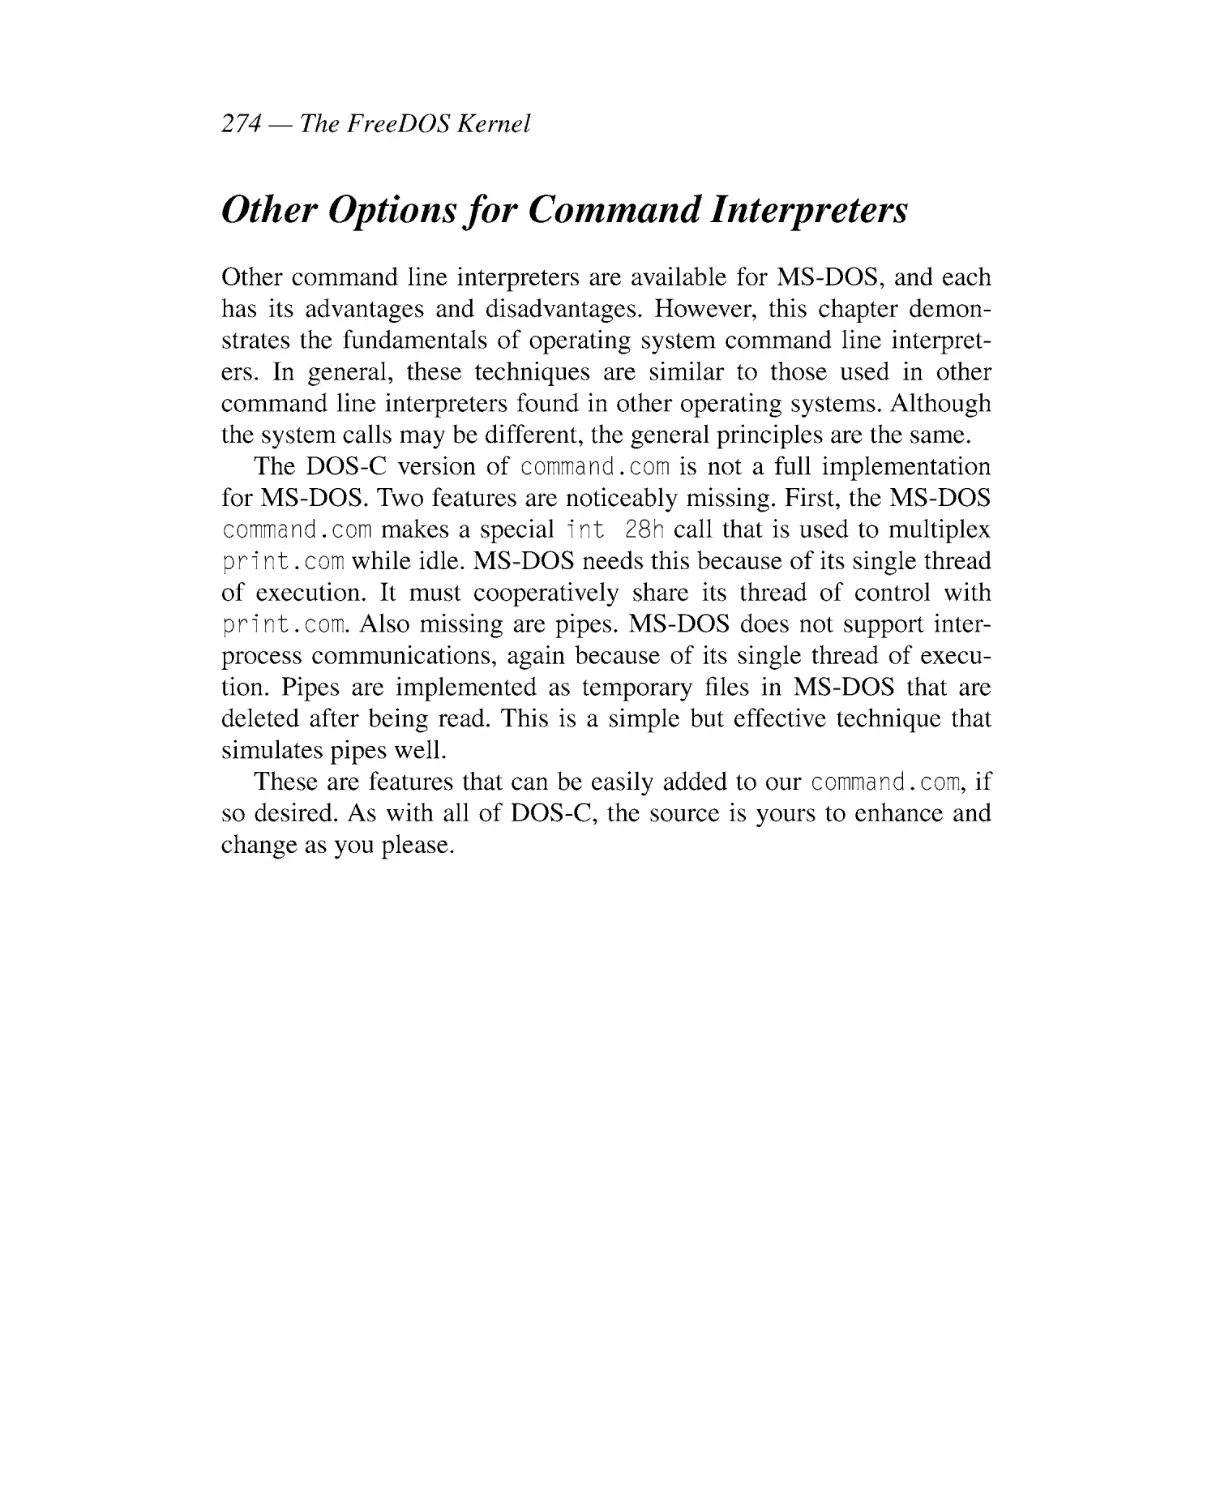 Other Options for Command Interpreters